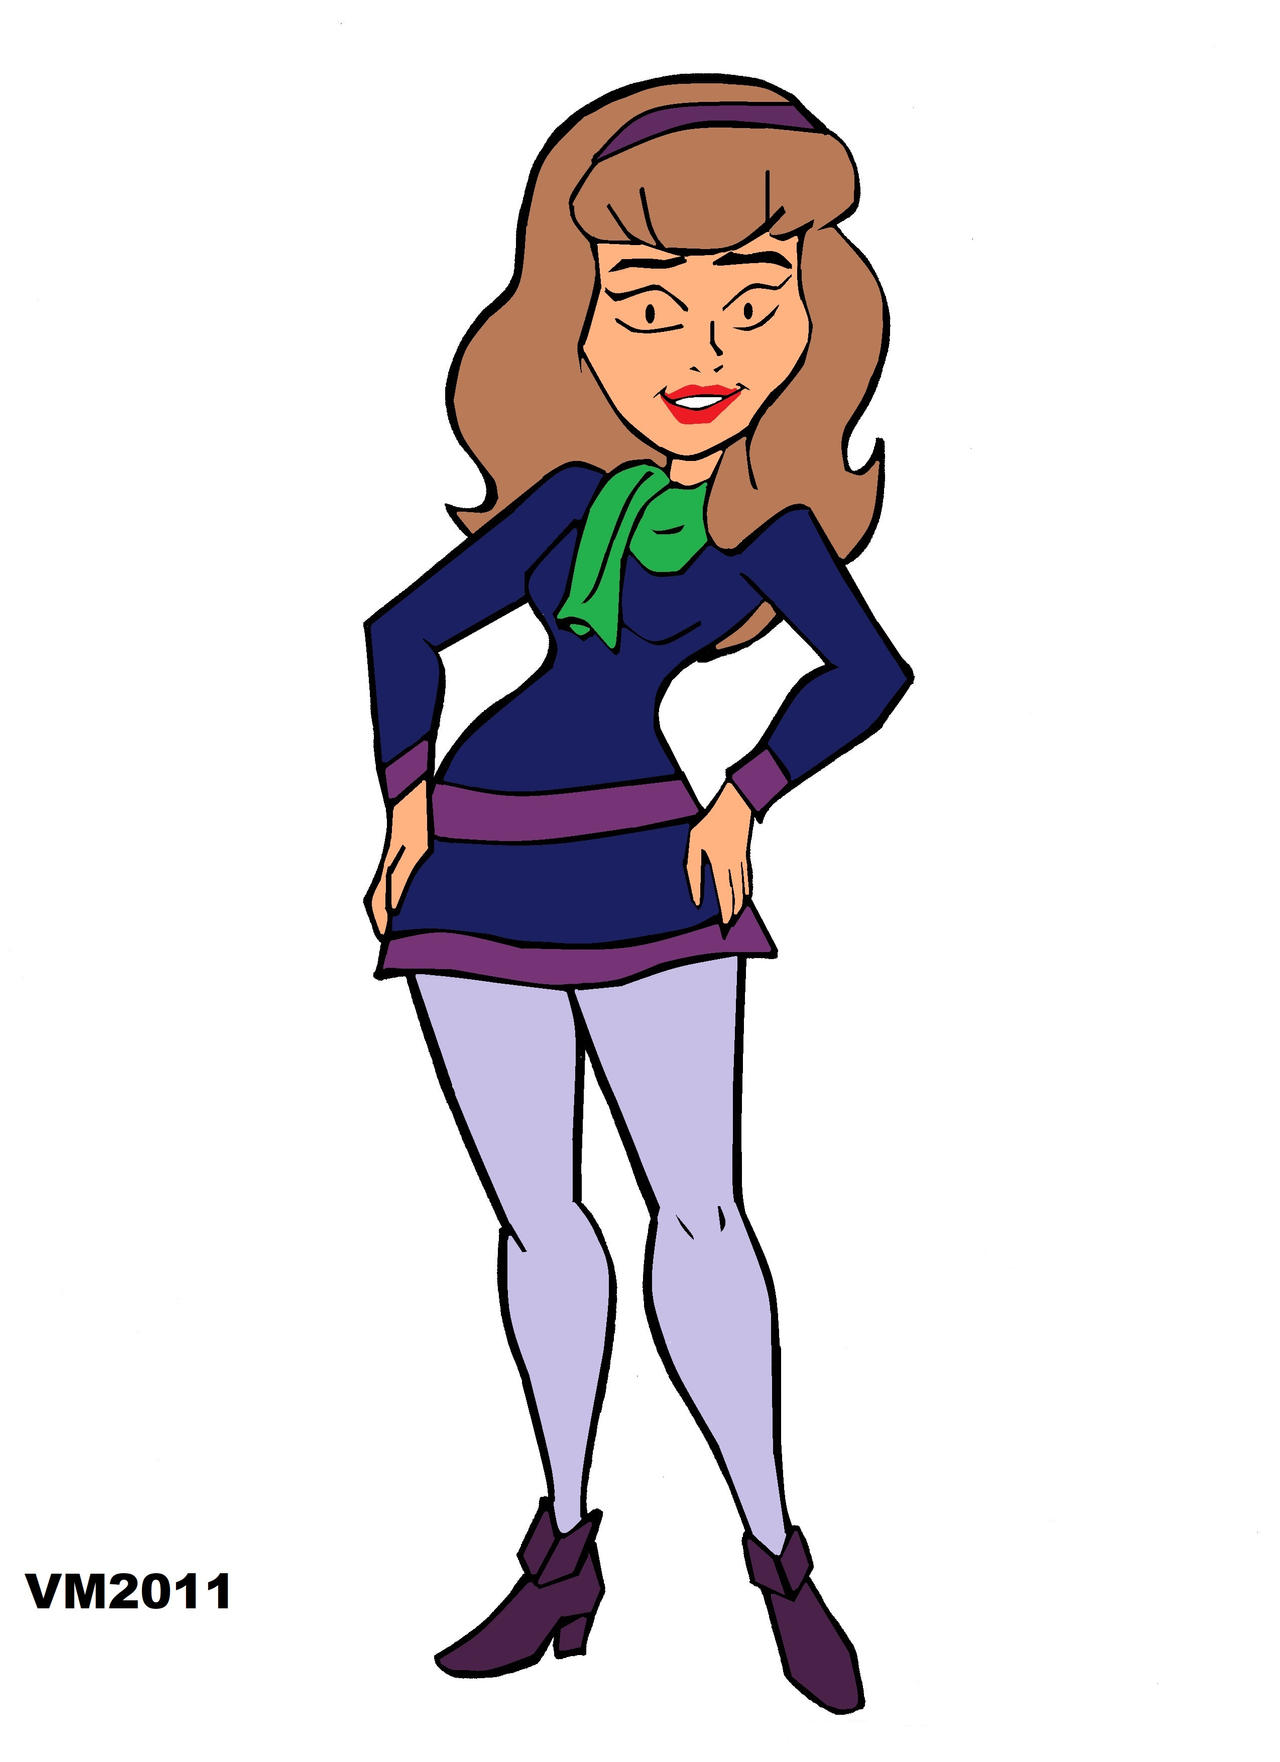 Scooby Doo And Guess Who-Daphne Blake by VectorMagnus2011 on DeviantArt